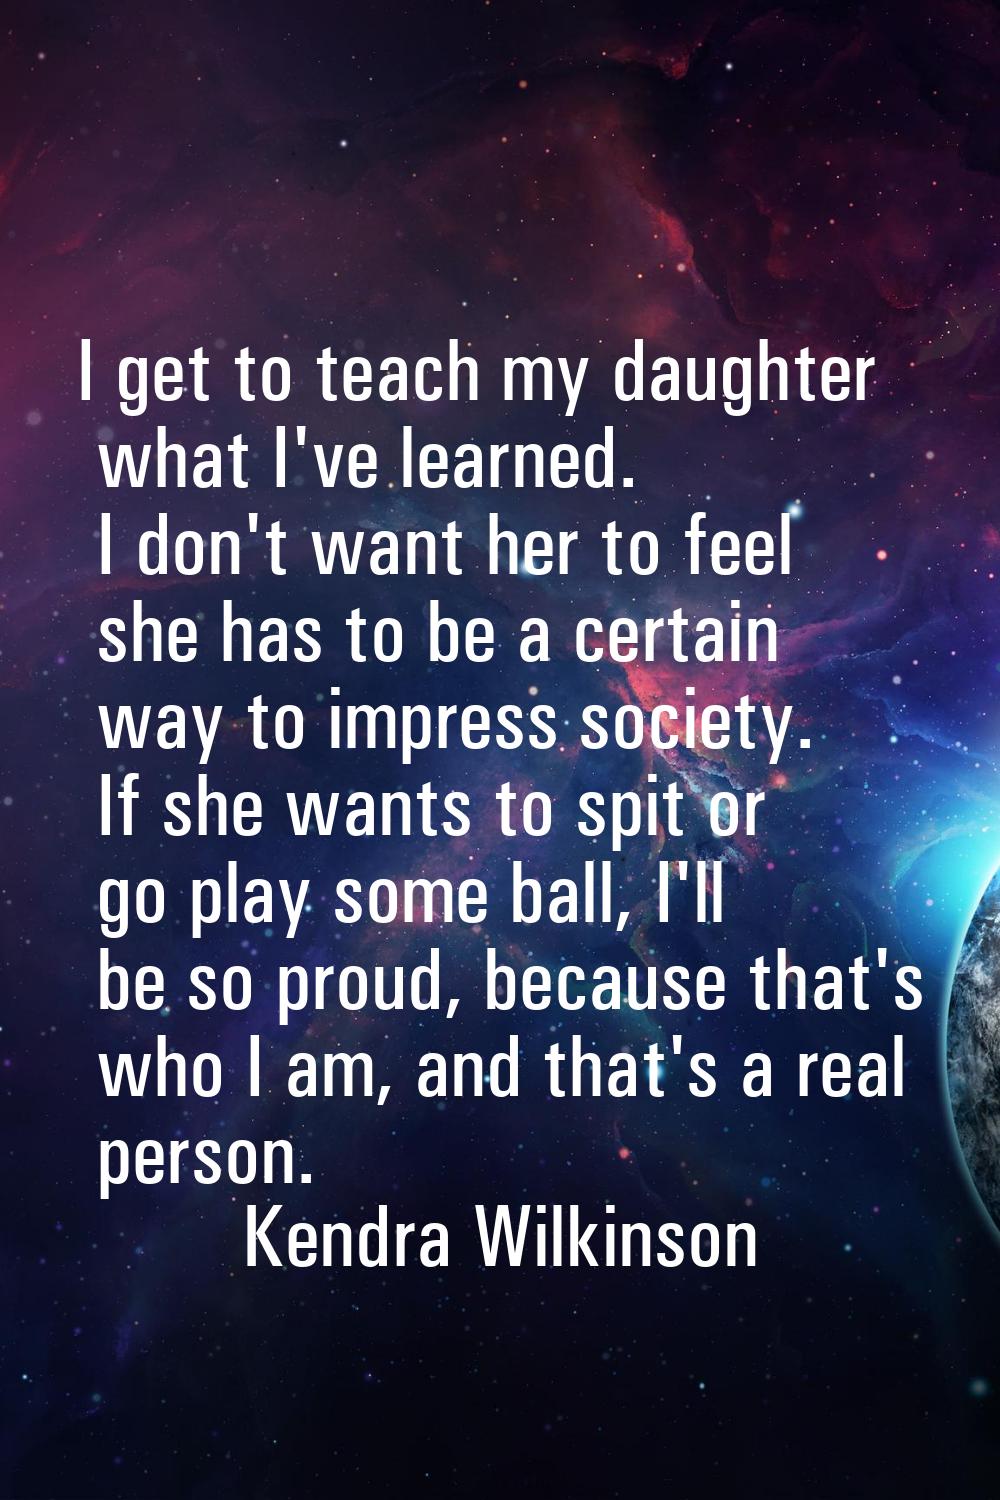 I get to teach my daughter what I've learned. I don't want her to feel she has to be a certain way 